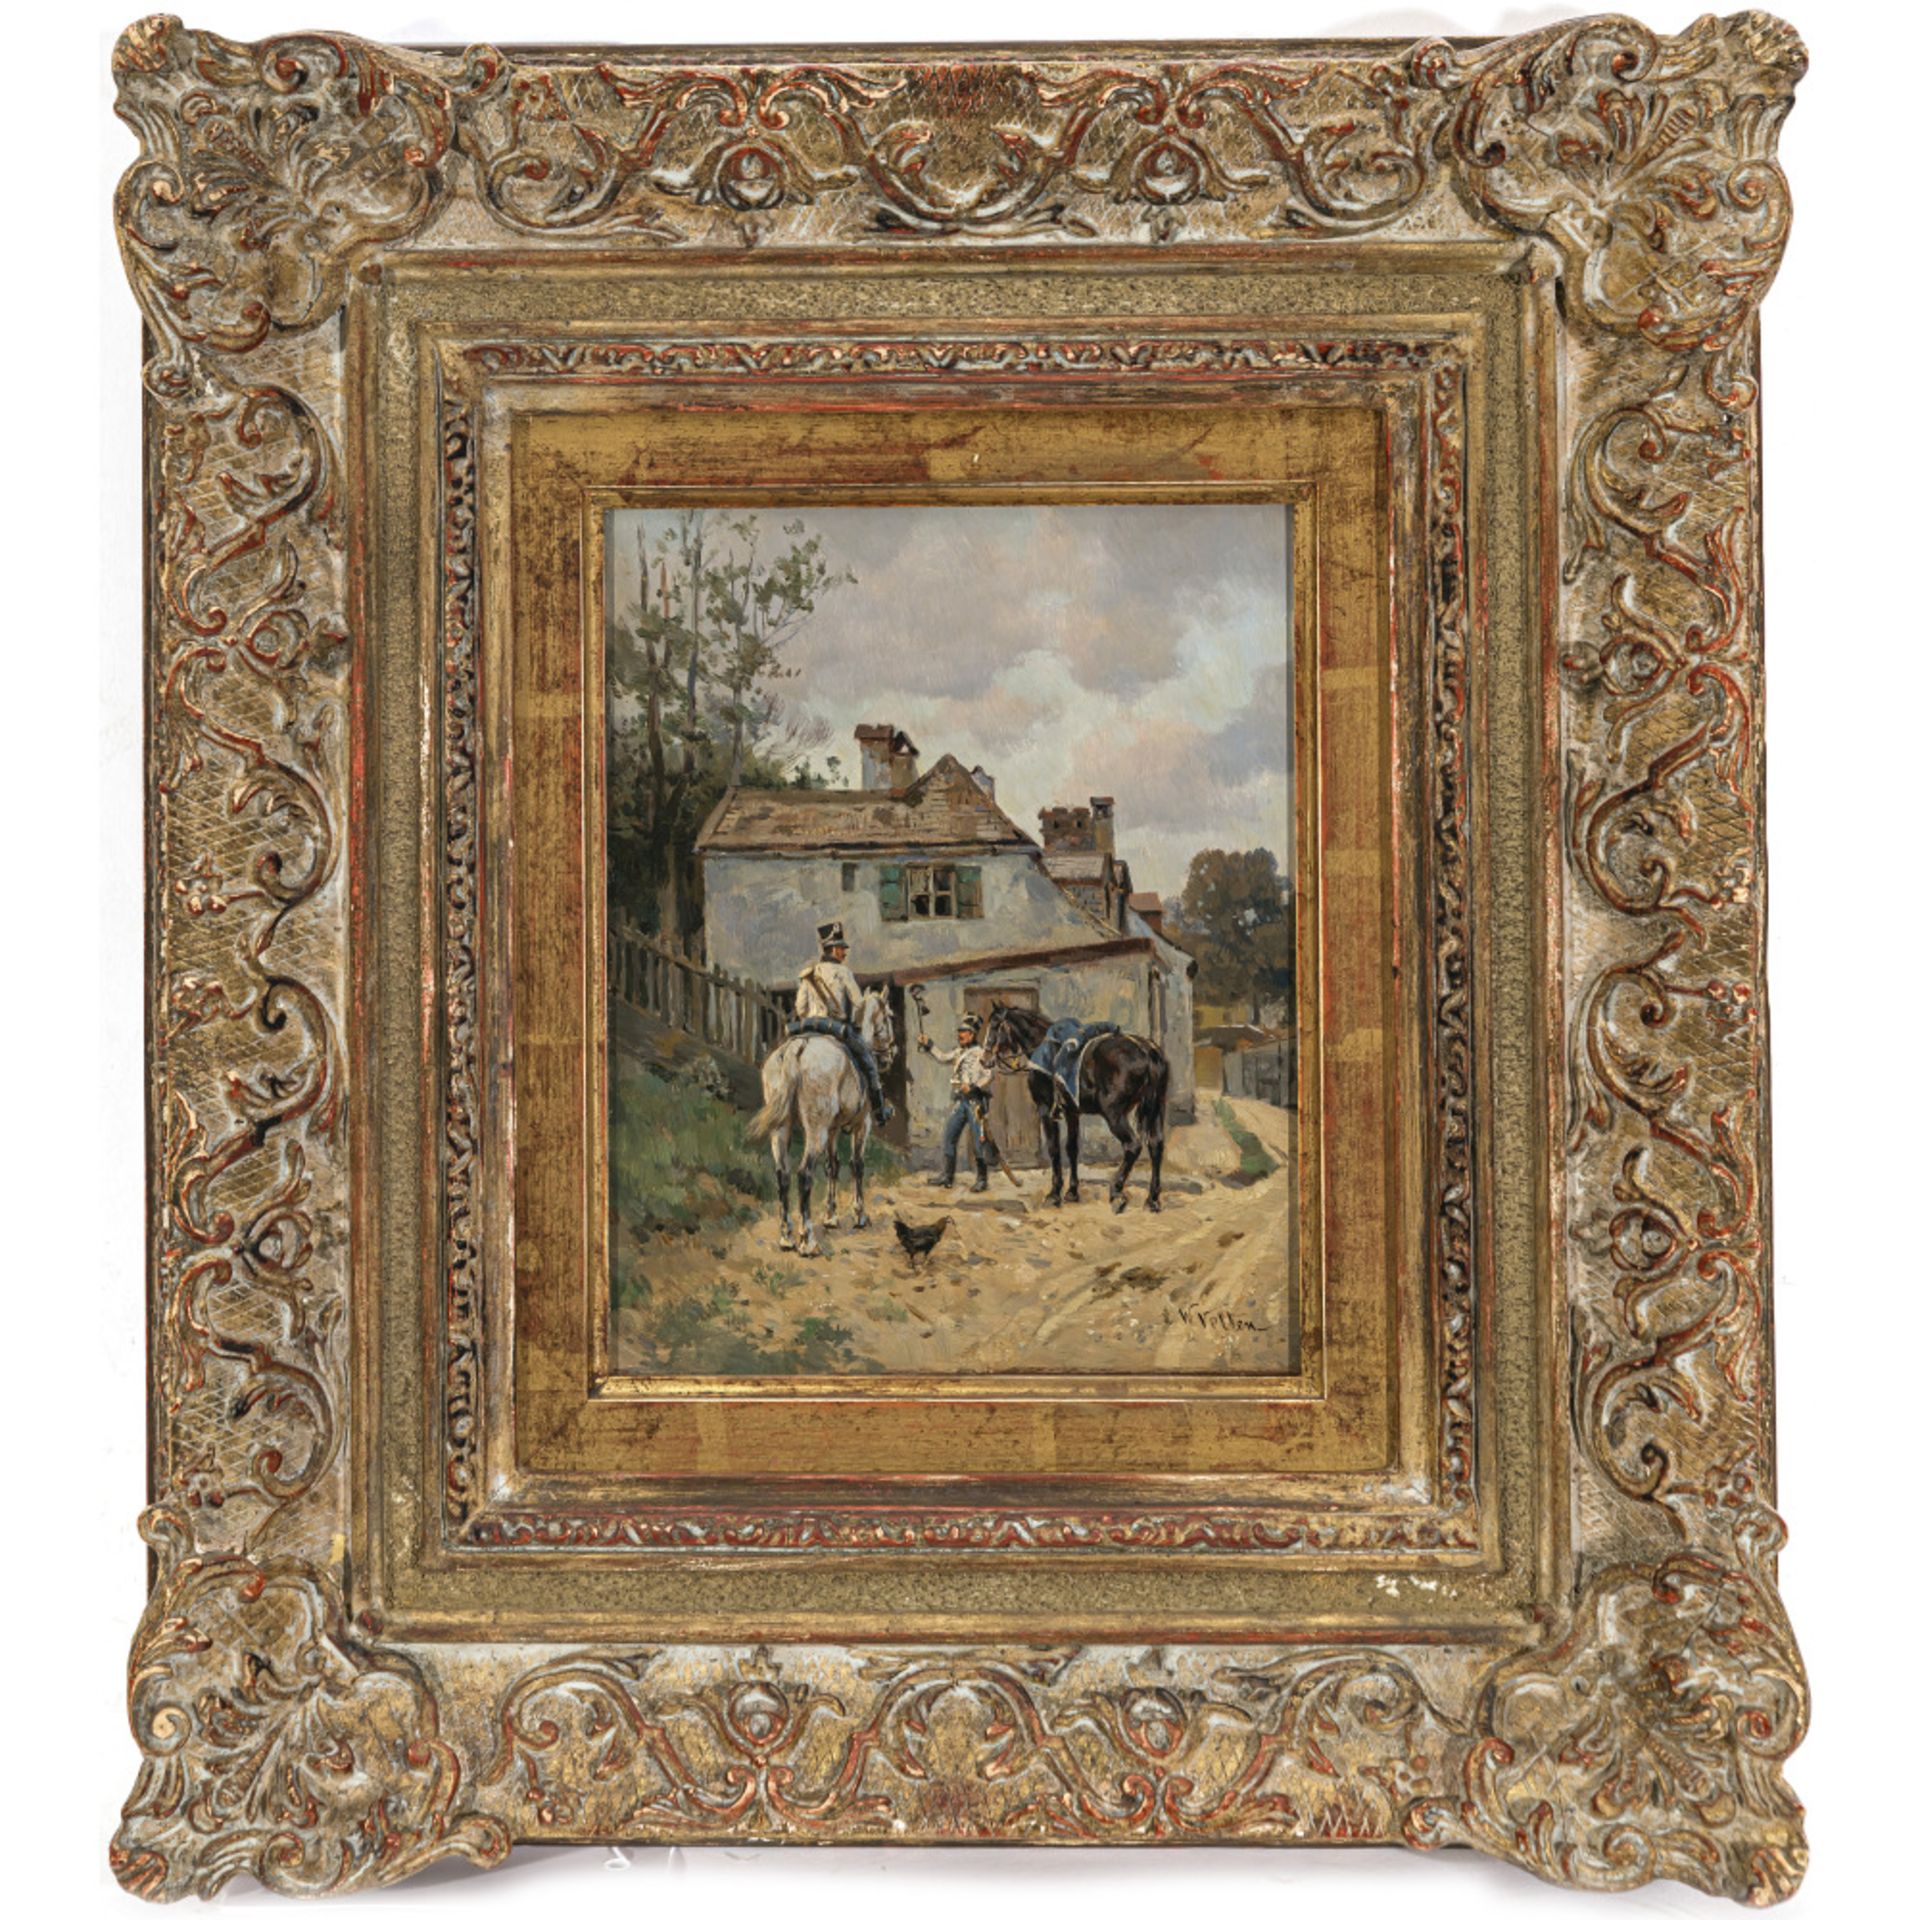 Wilhelm Velten - Soldiers in front of a house - Image 2 of 2